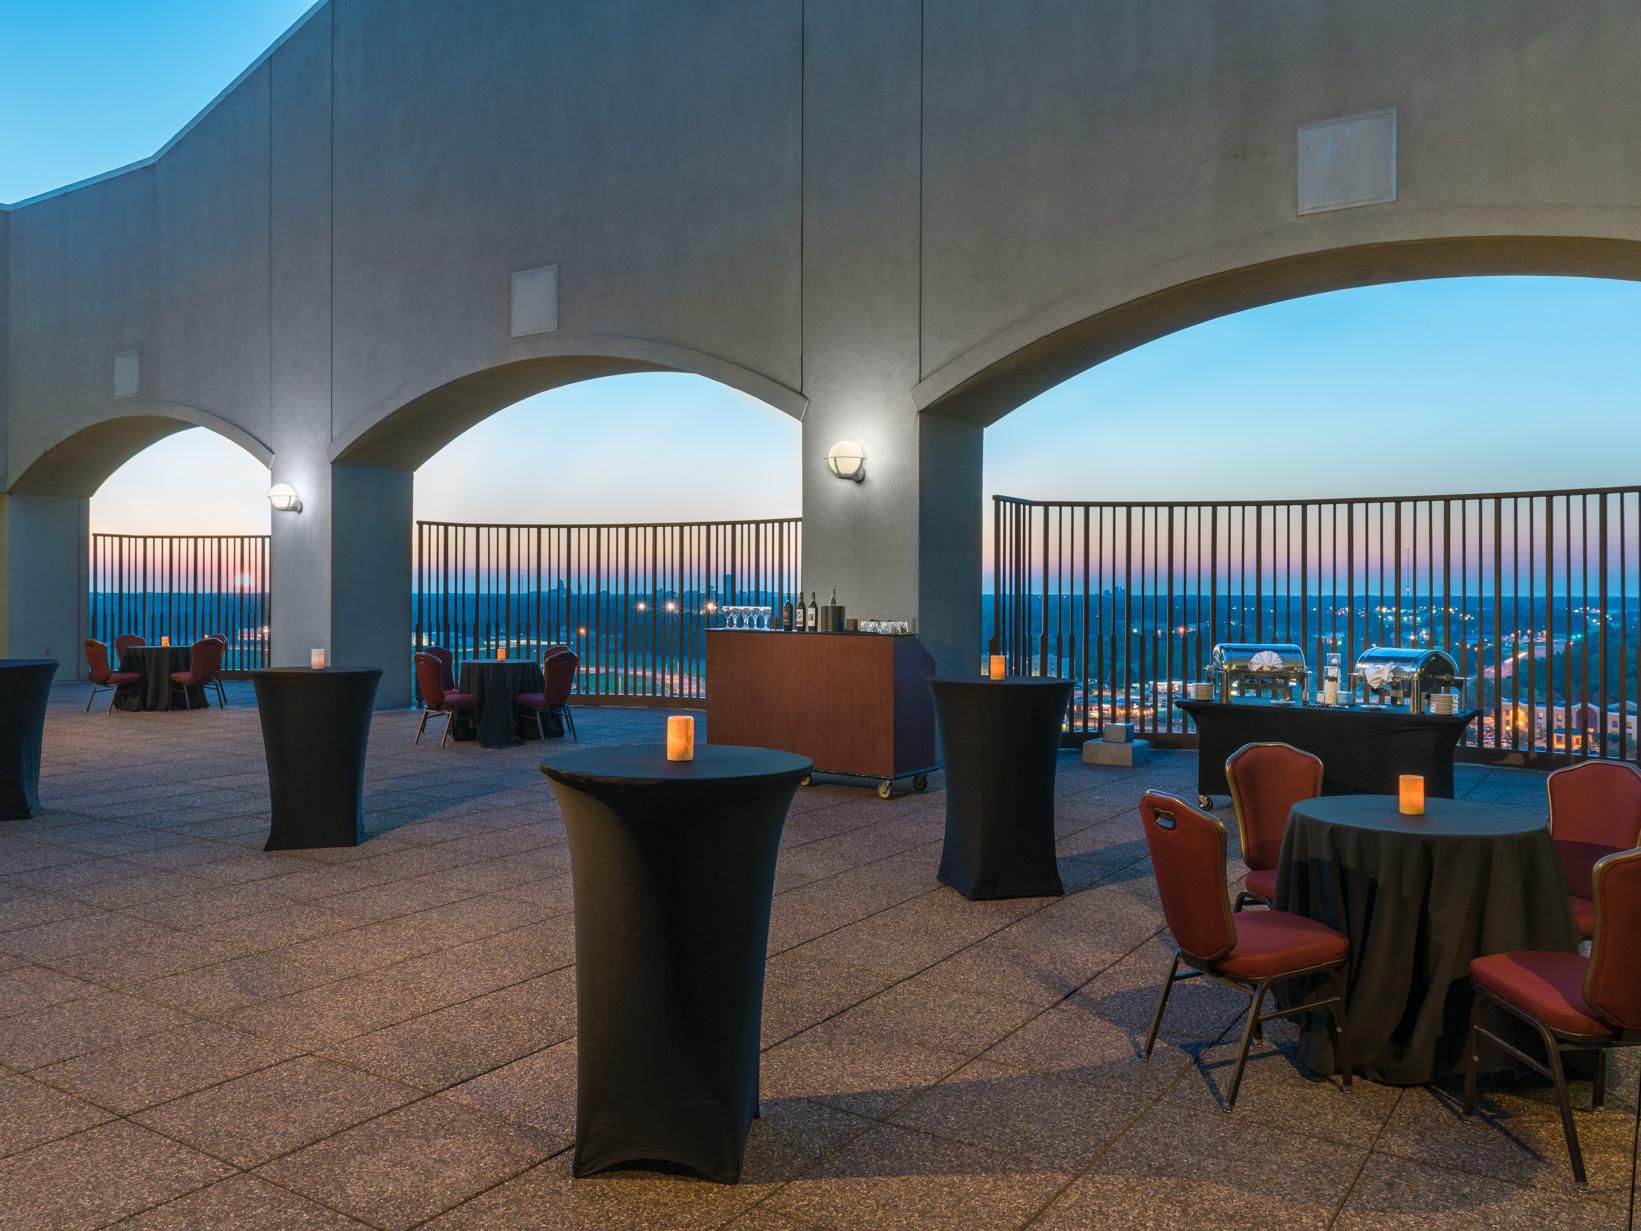 The Rooftop is the perfect venue for a social event or an intimate wedding in Springfield IL. This area provides guests an outdoor experience while looking into the skyline of Springfield. The hotel can cater function up to 150 attendees. Give our sales office a call today to book the space.